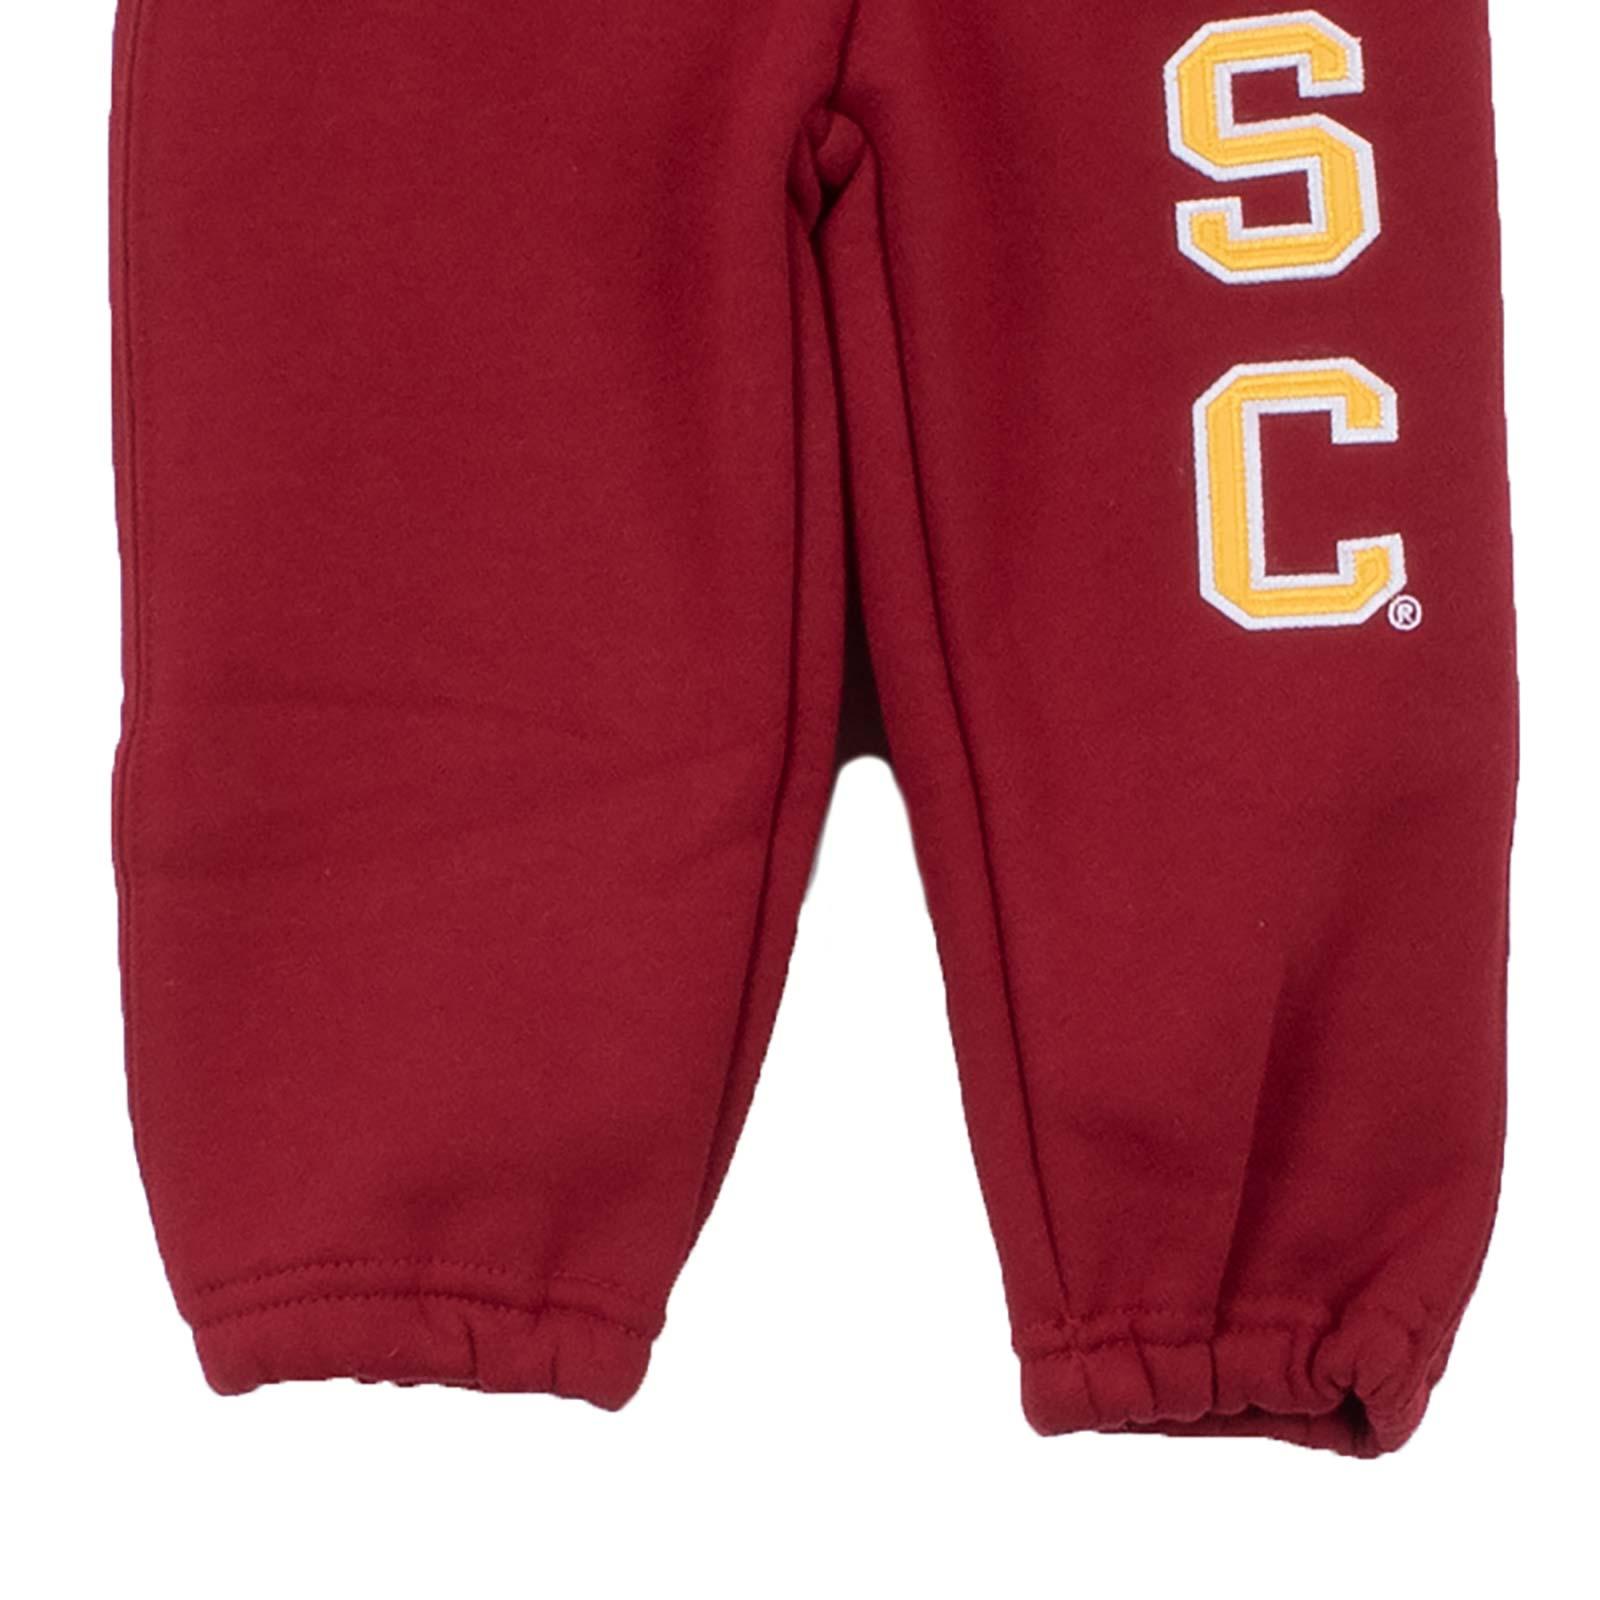 USC Arch Toddler TT Pant Oxford image21